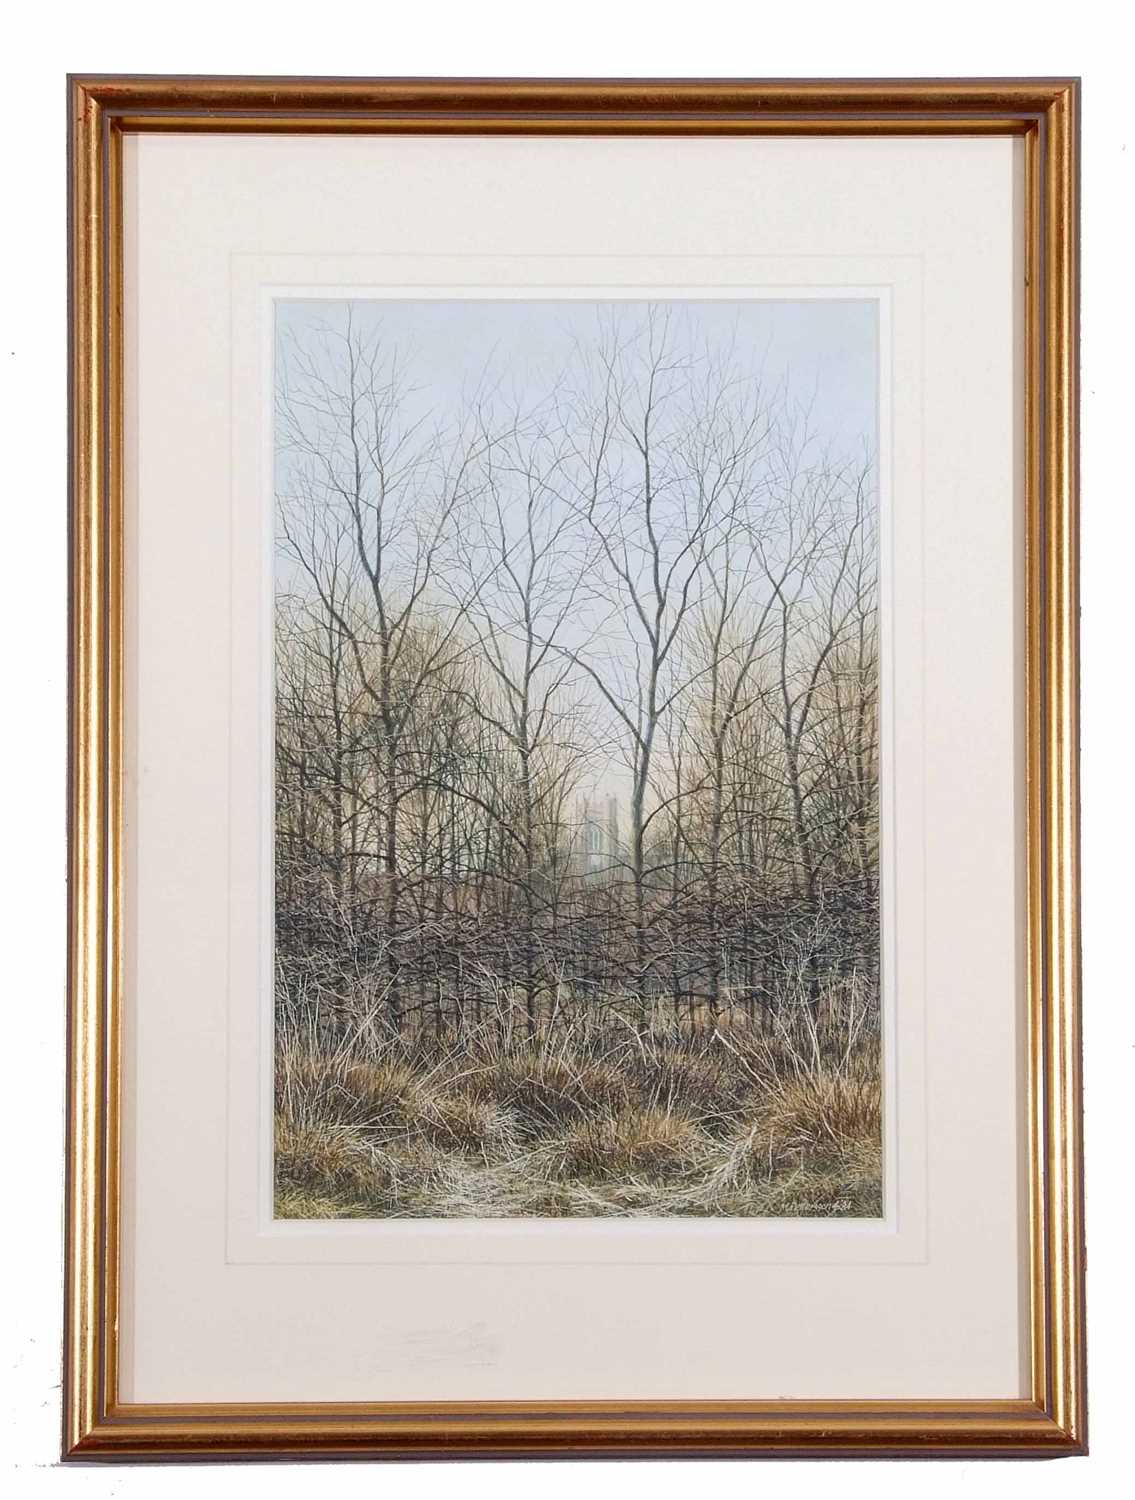 Michael Peterson (British Contemporary), 'Monks, Eleigh', watercolour on paper, signed, framed and - Image 2 of 3